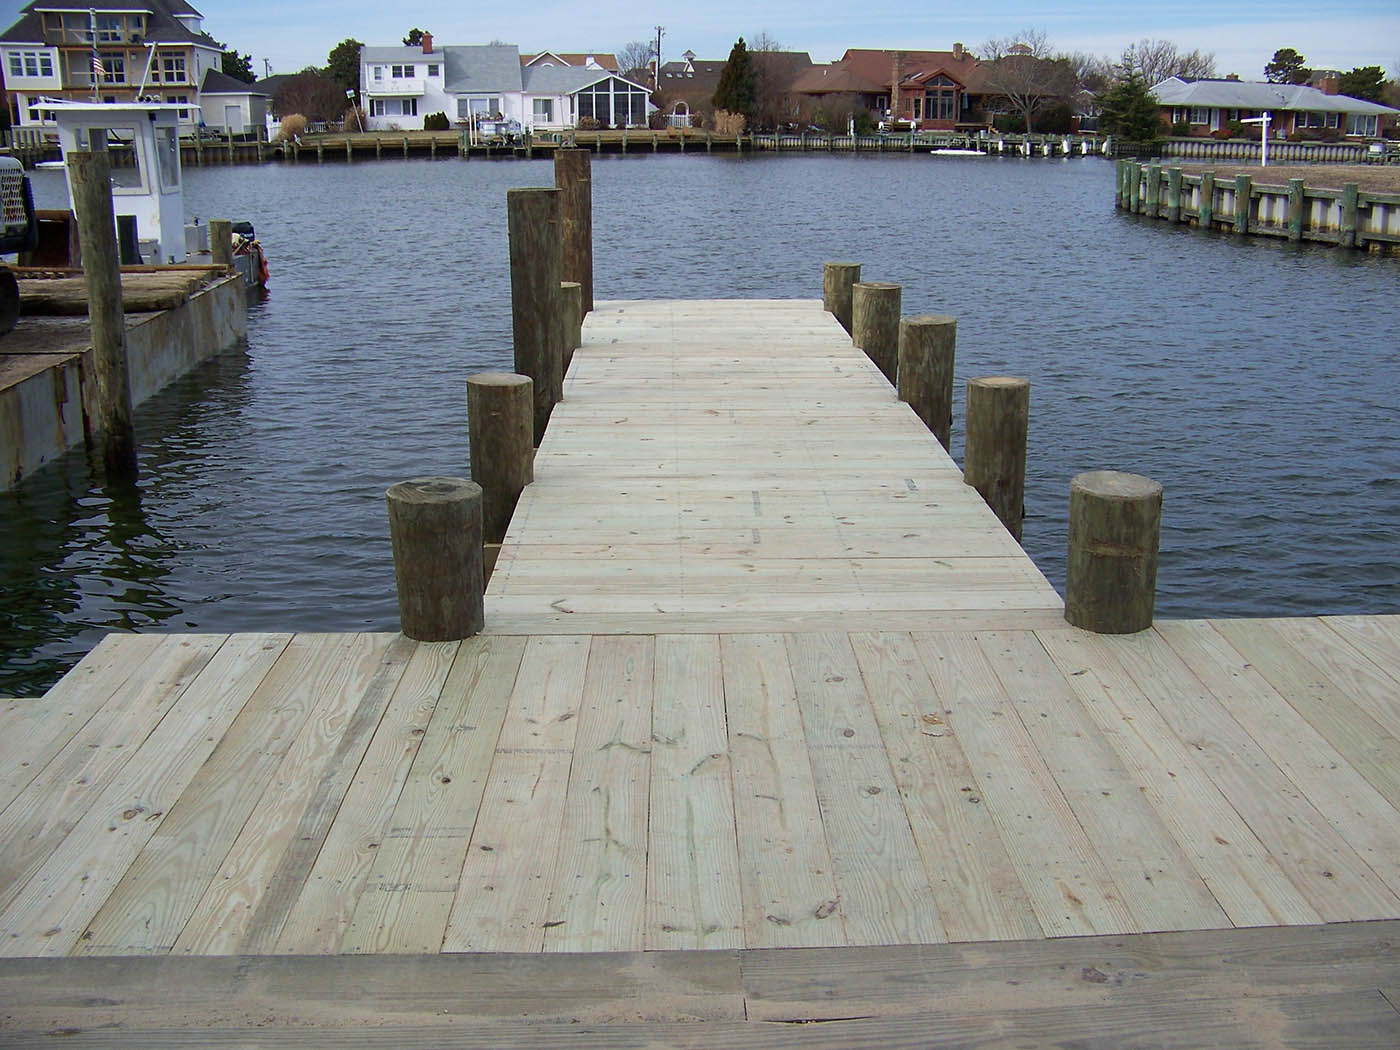 Boat dock with slips on each side